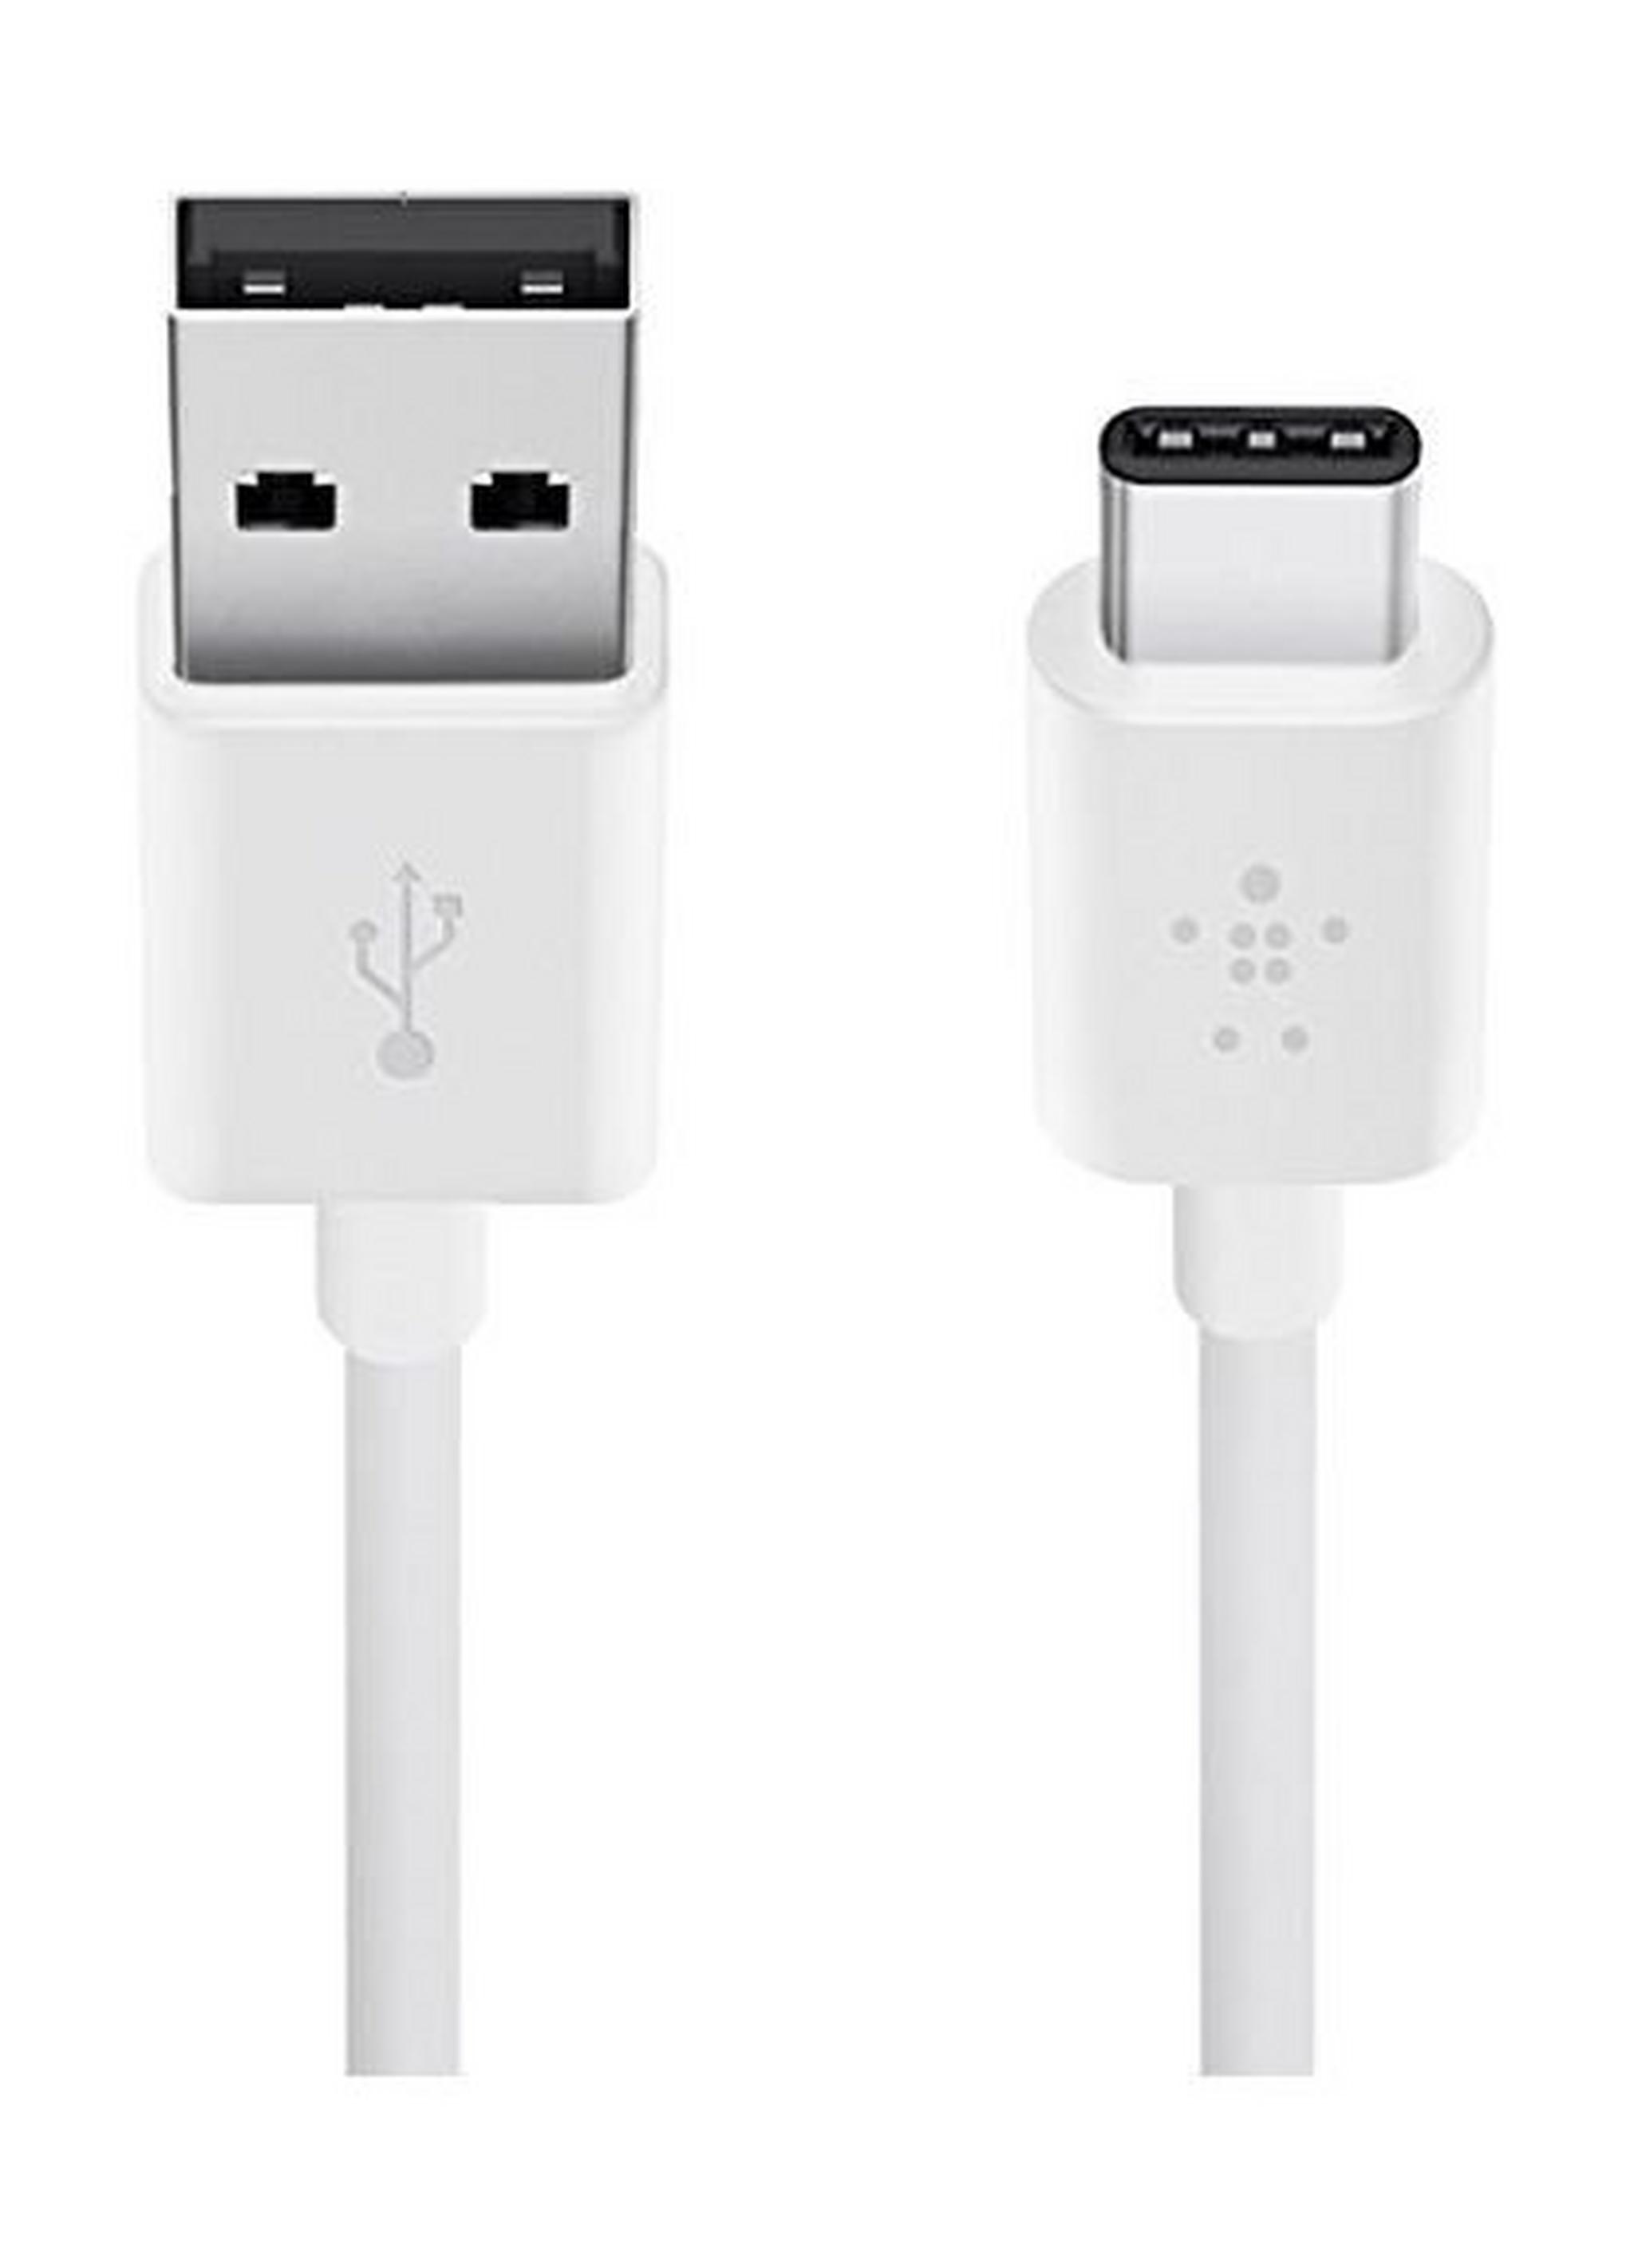 Belkin 3.1 USB-A to USB-C Cable 1.8 Meter (F2CU032bt06) - White